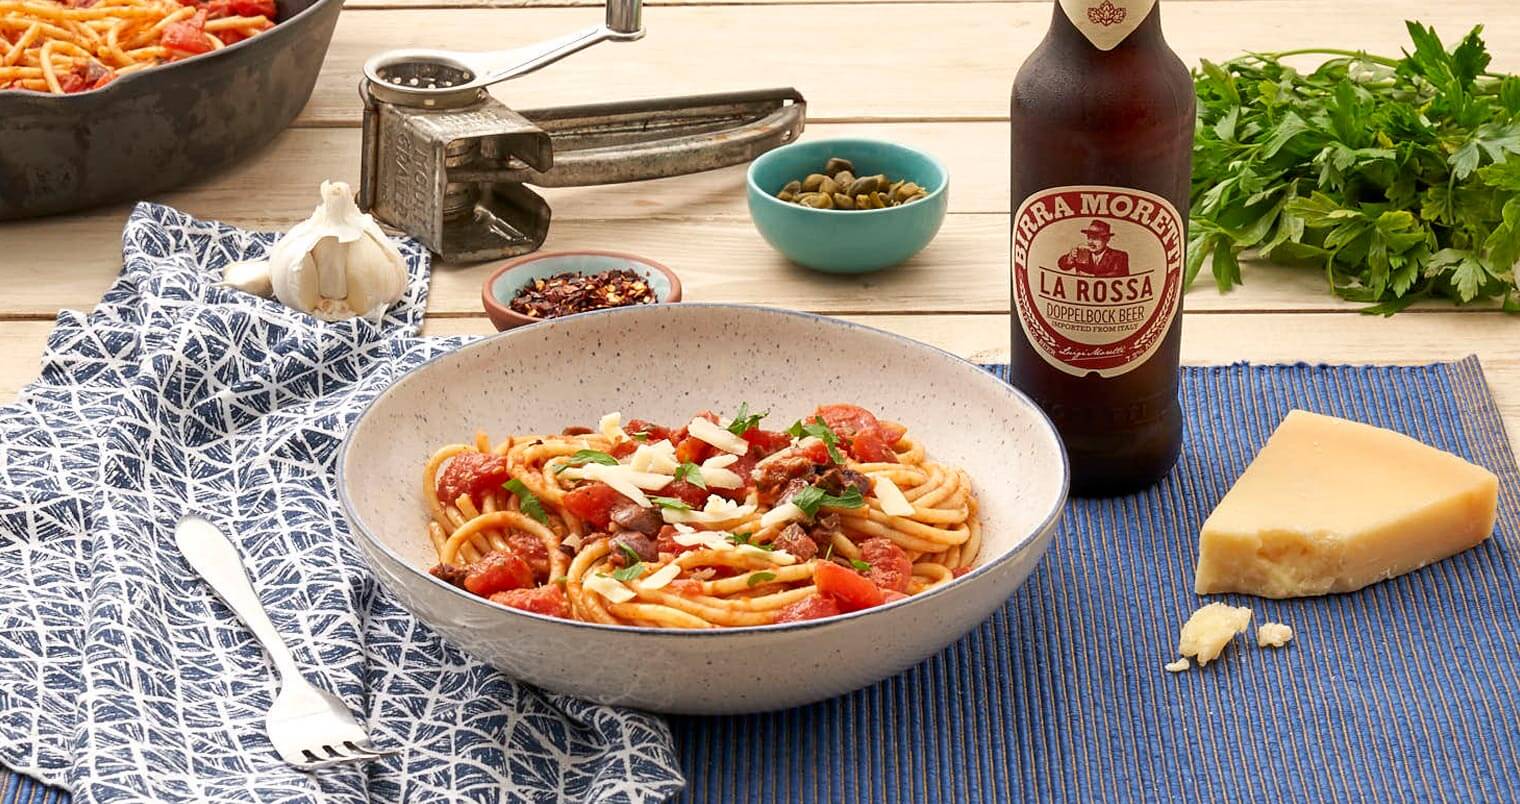 Birra Moretti 'What's More Italian' Summer Program, bottle and dishes display on dining table, garnishes, featured image